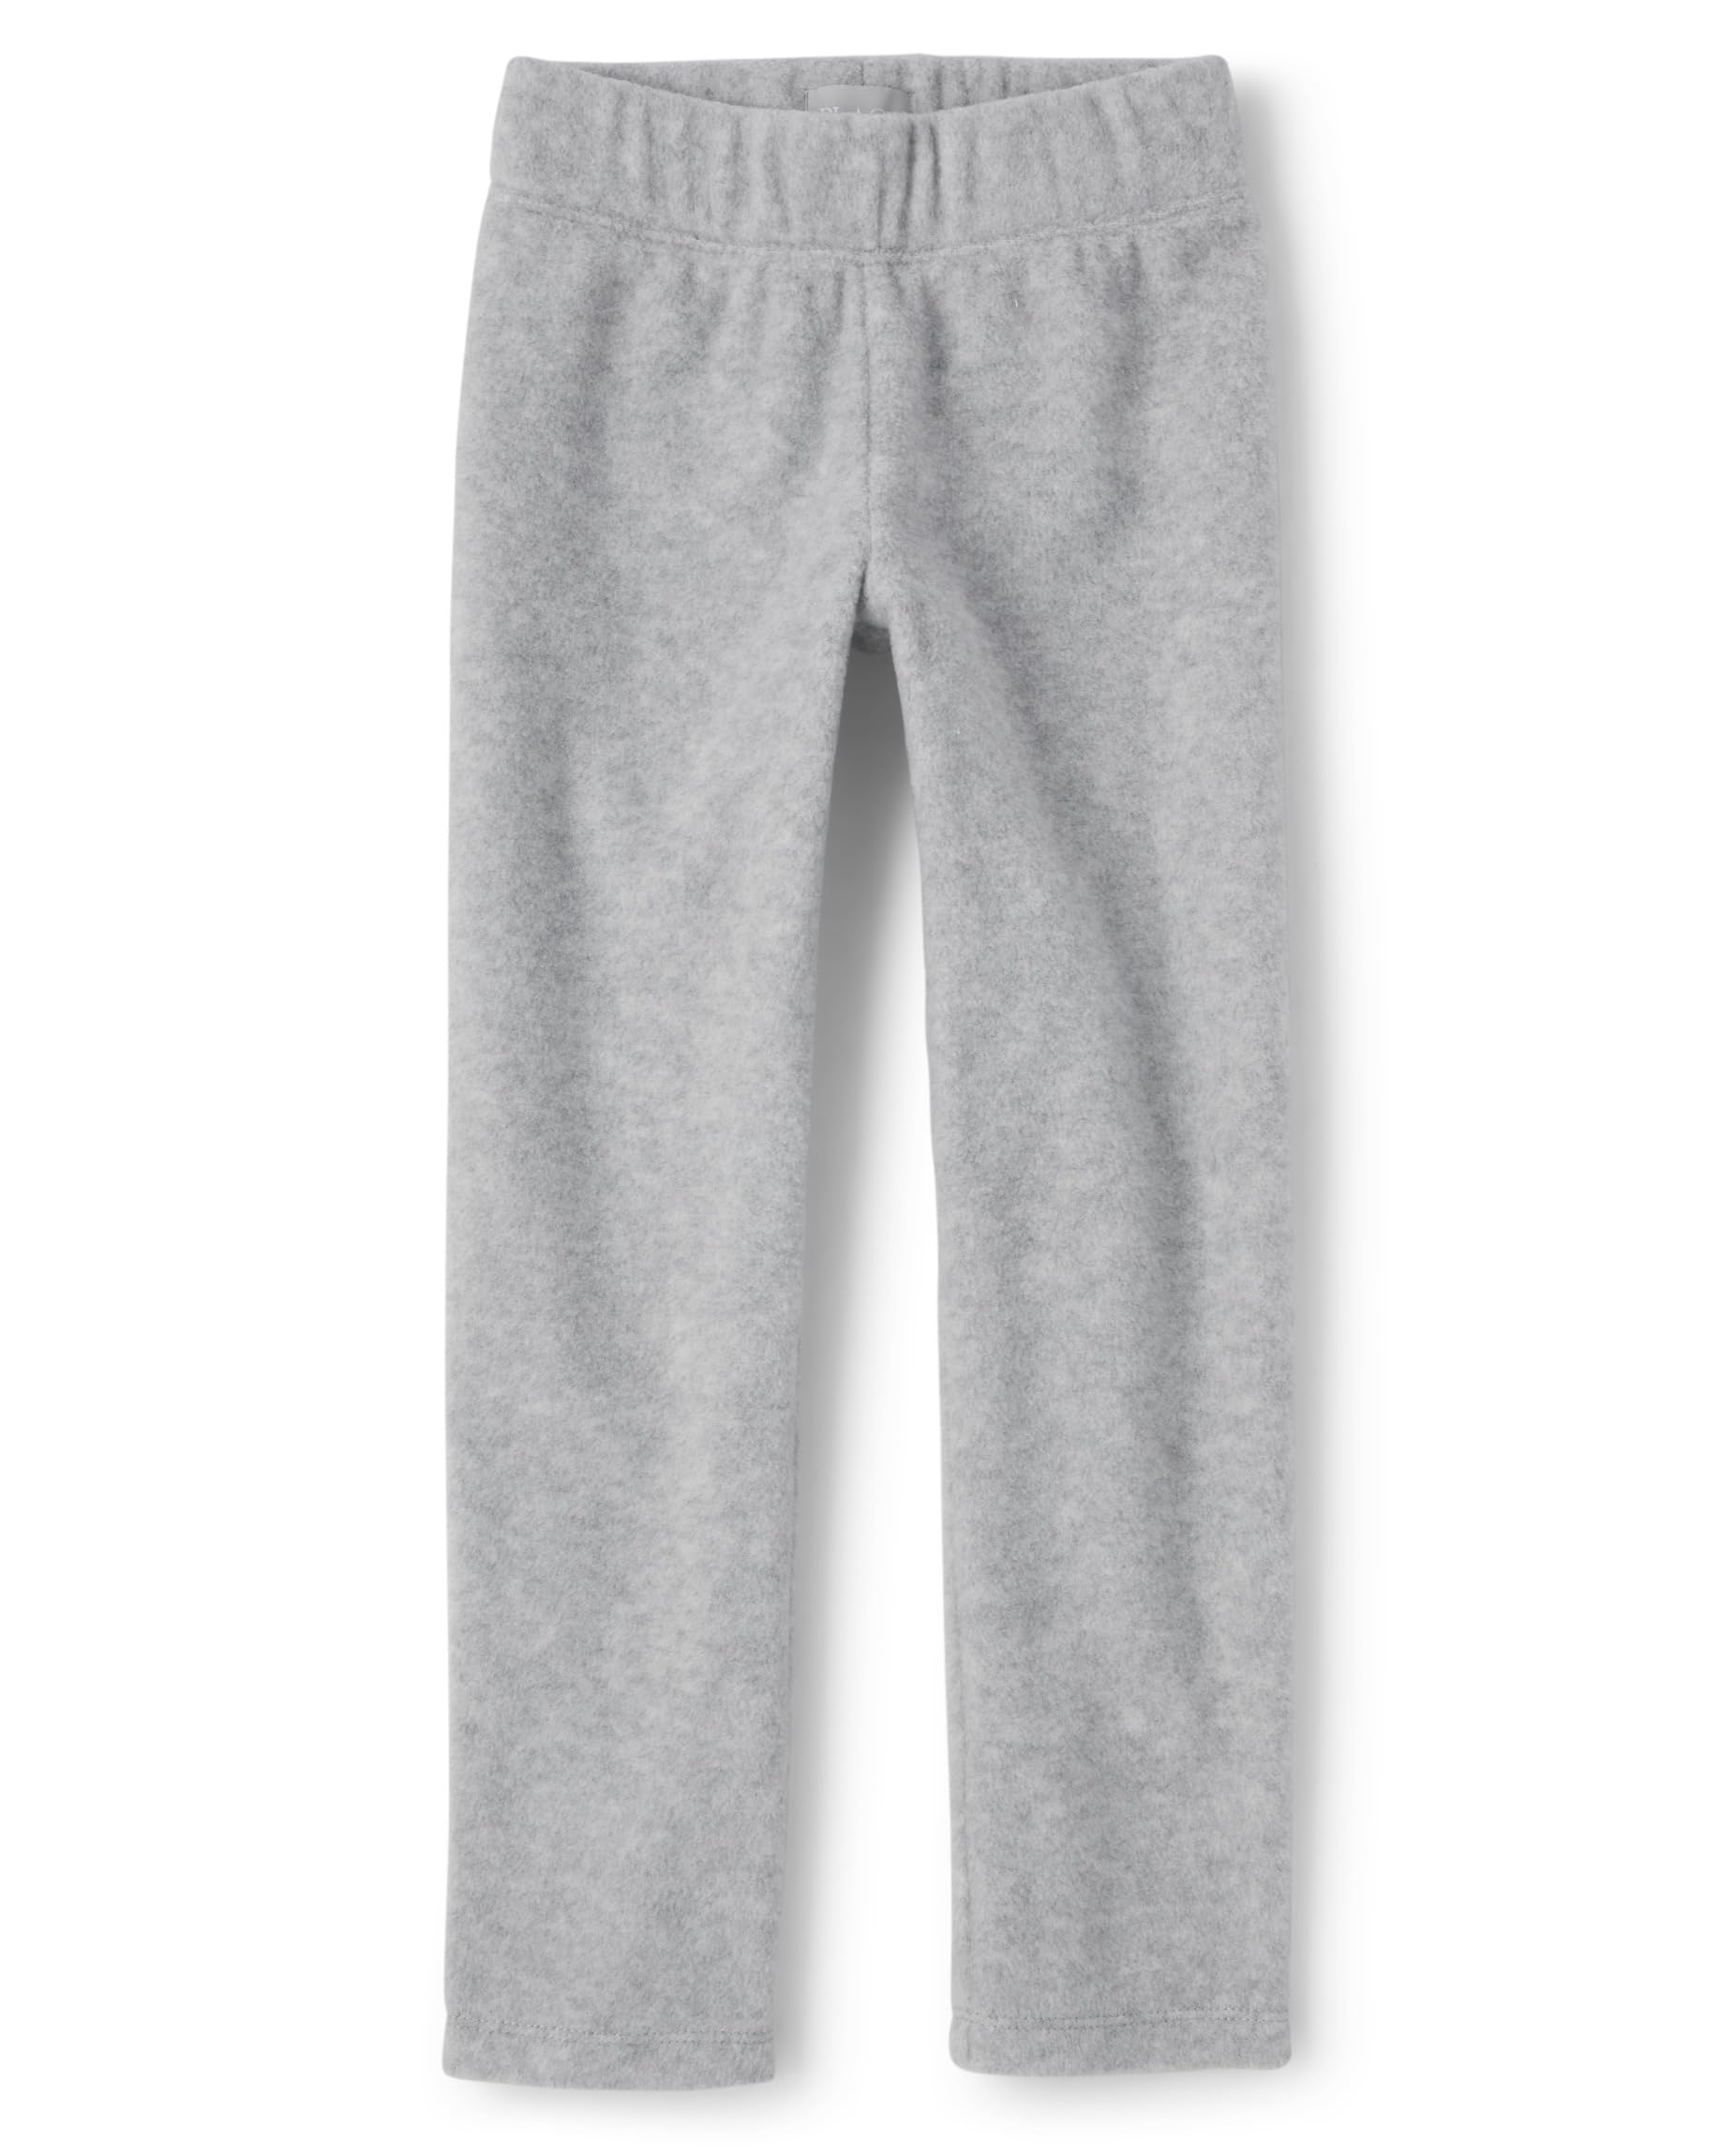 The Children's Place Girls' Warm Fleece Pull On Pants